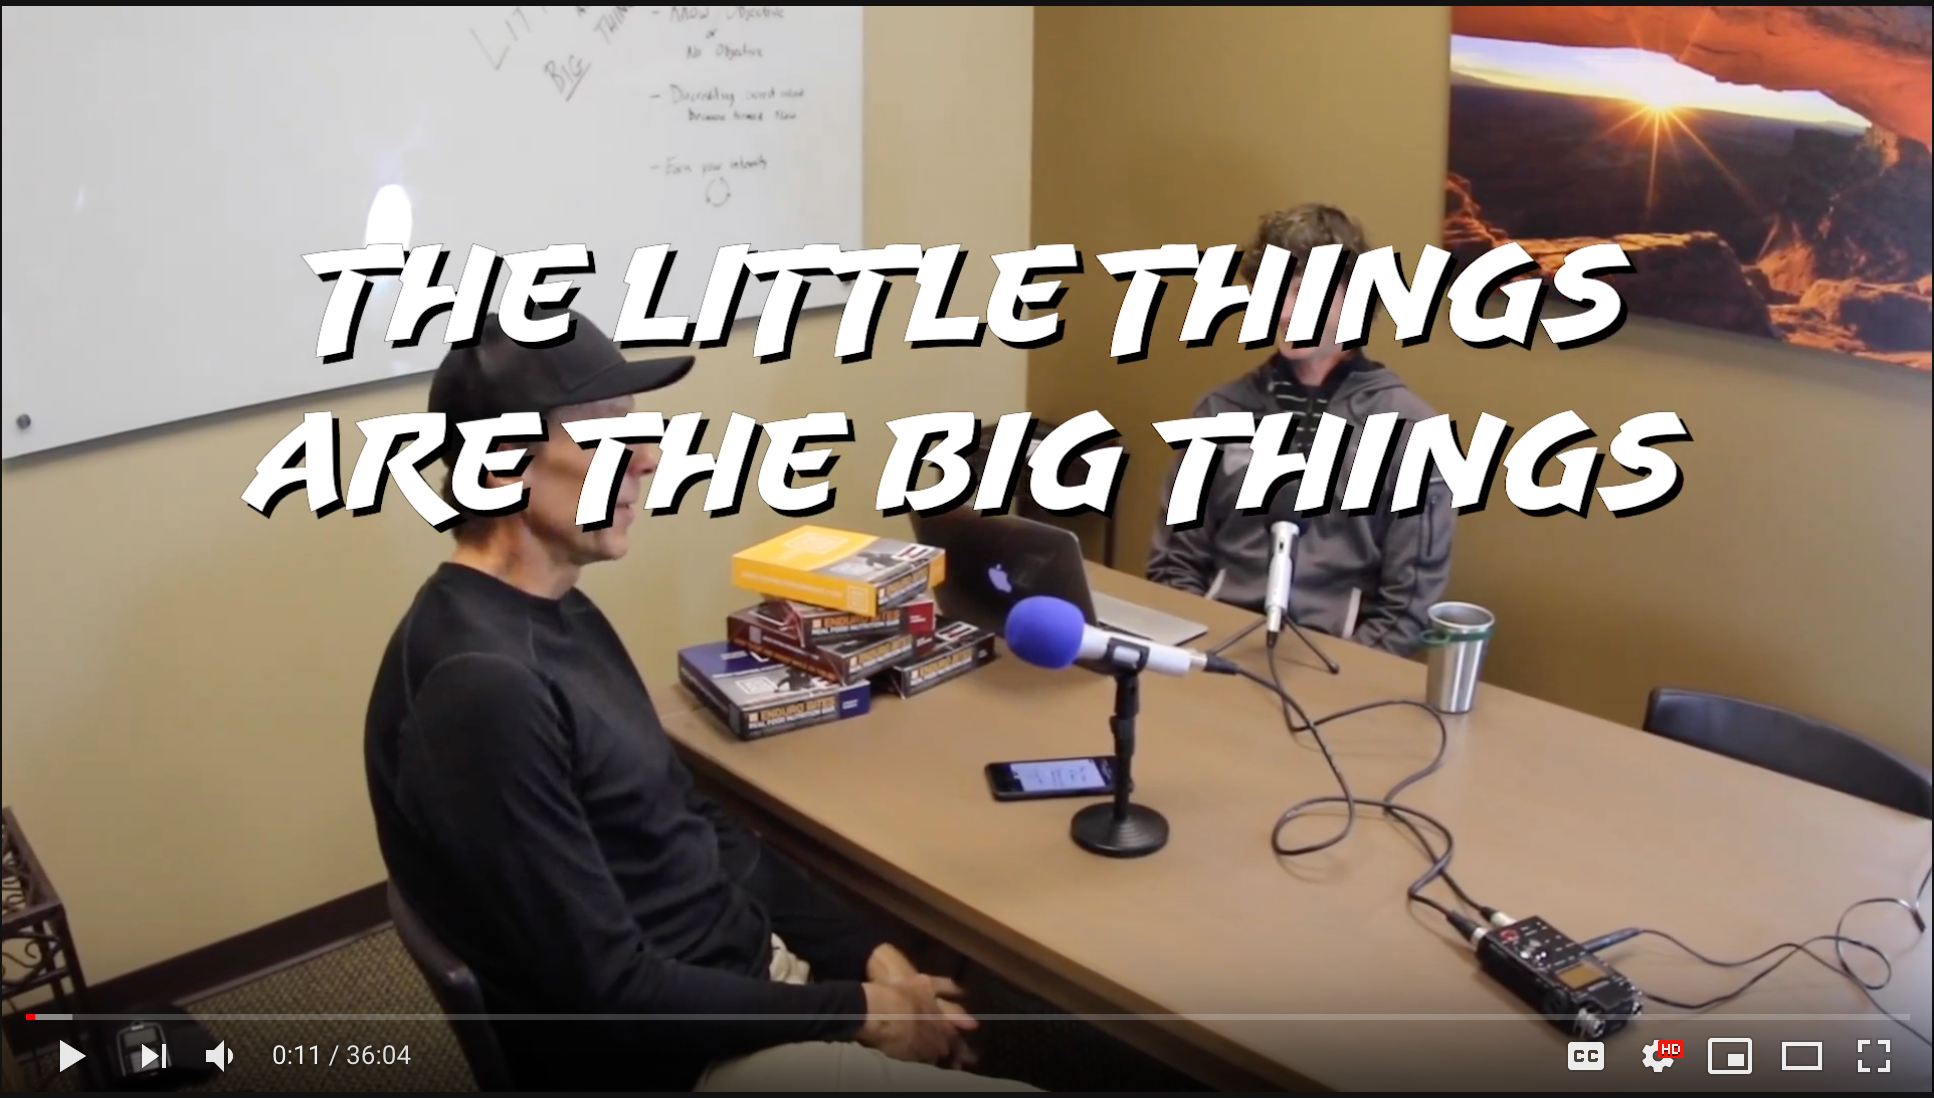 The Little Things are the Big Things: A discussion on intensity while training.